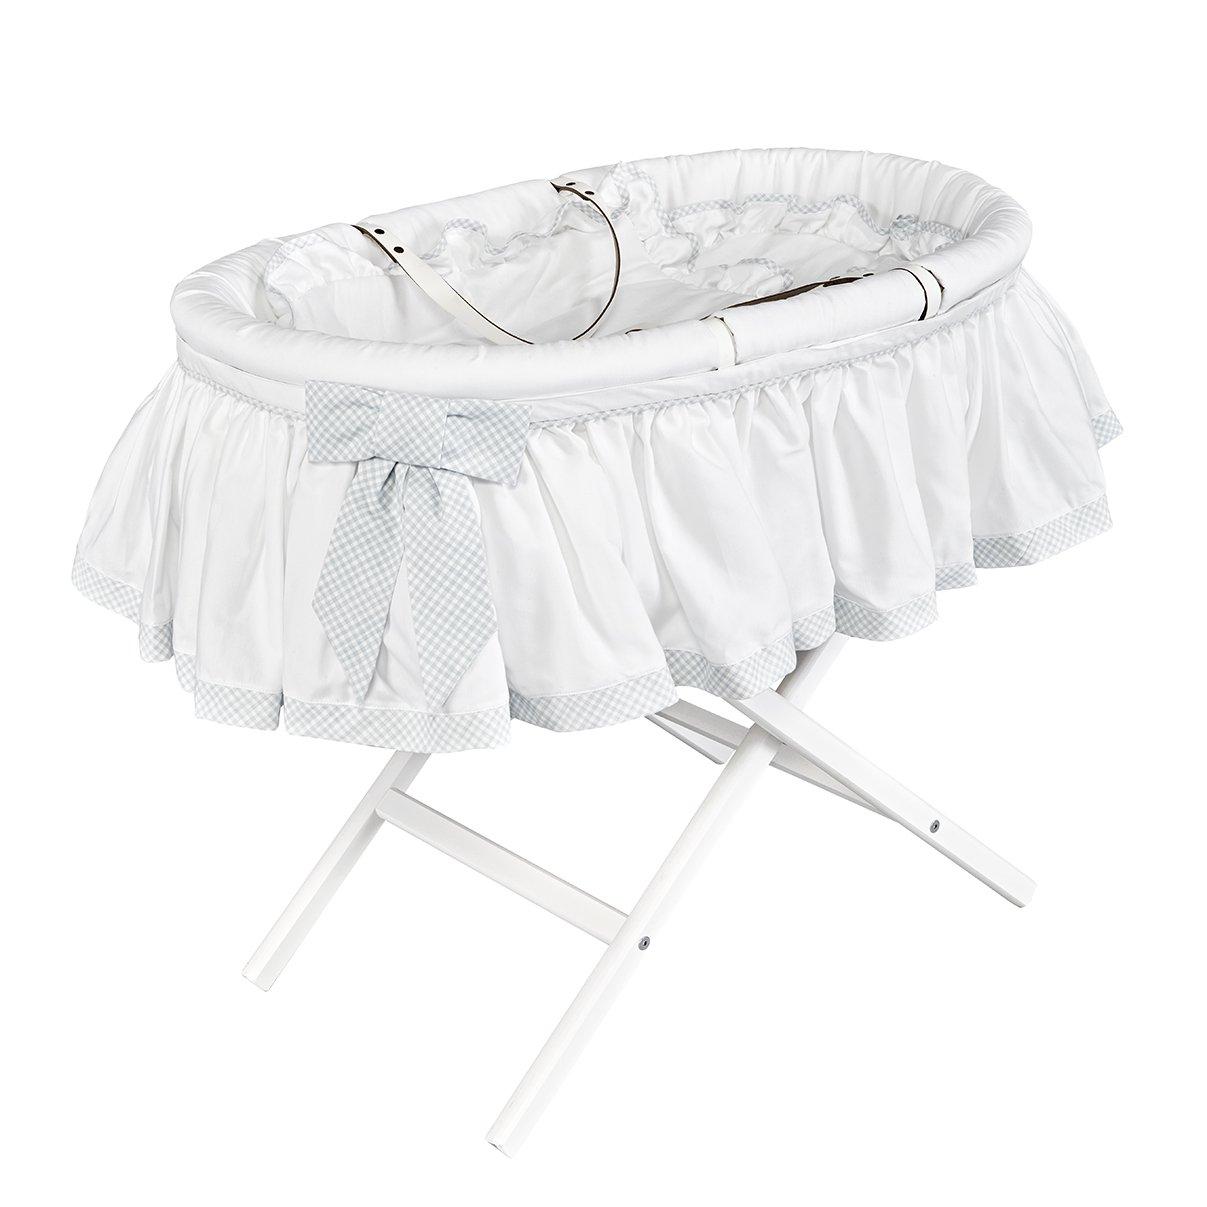 Dragons Moses Basket with a Classic Skirt - Moses Basket with Hood in Plain Blue